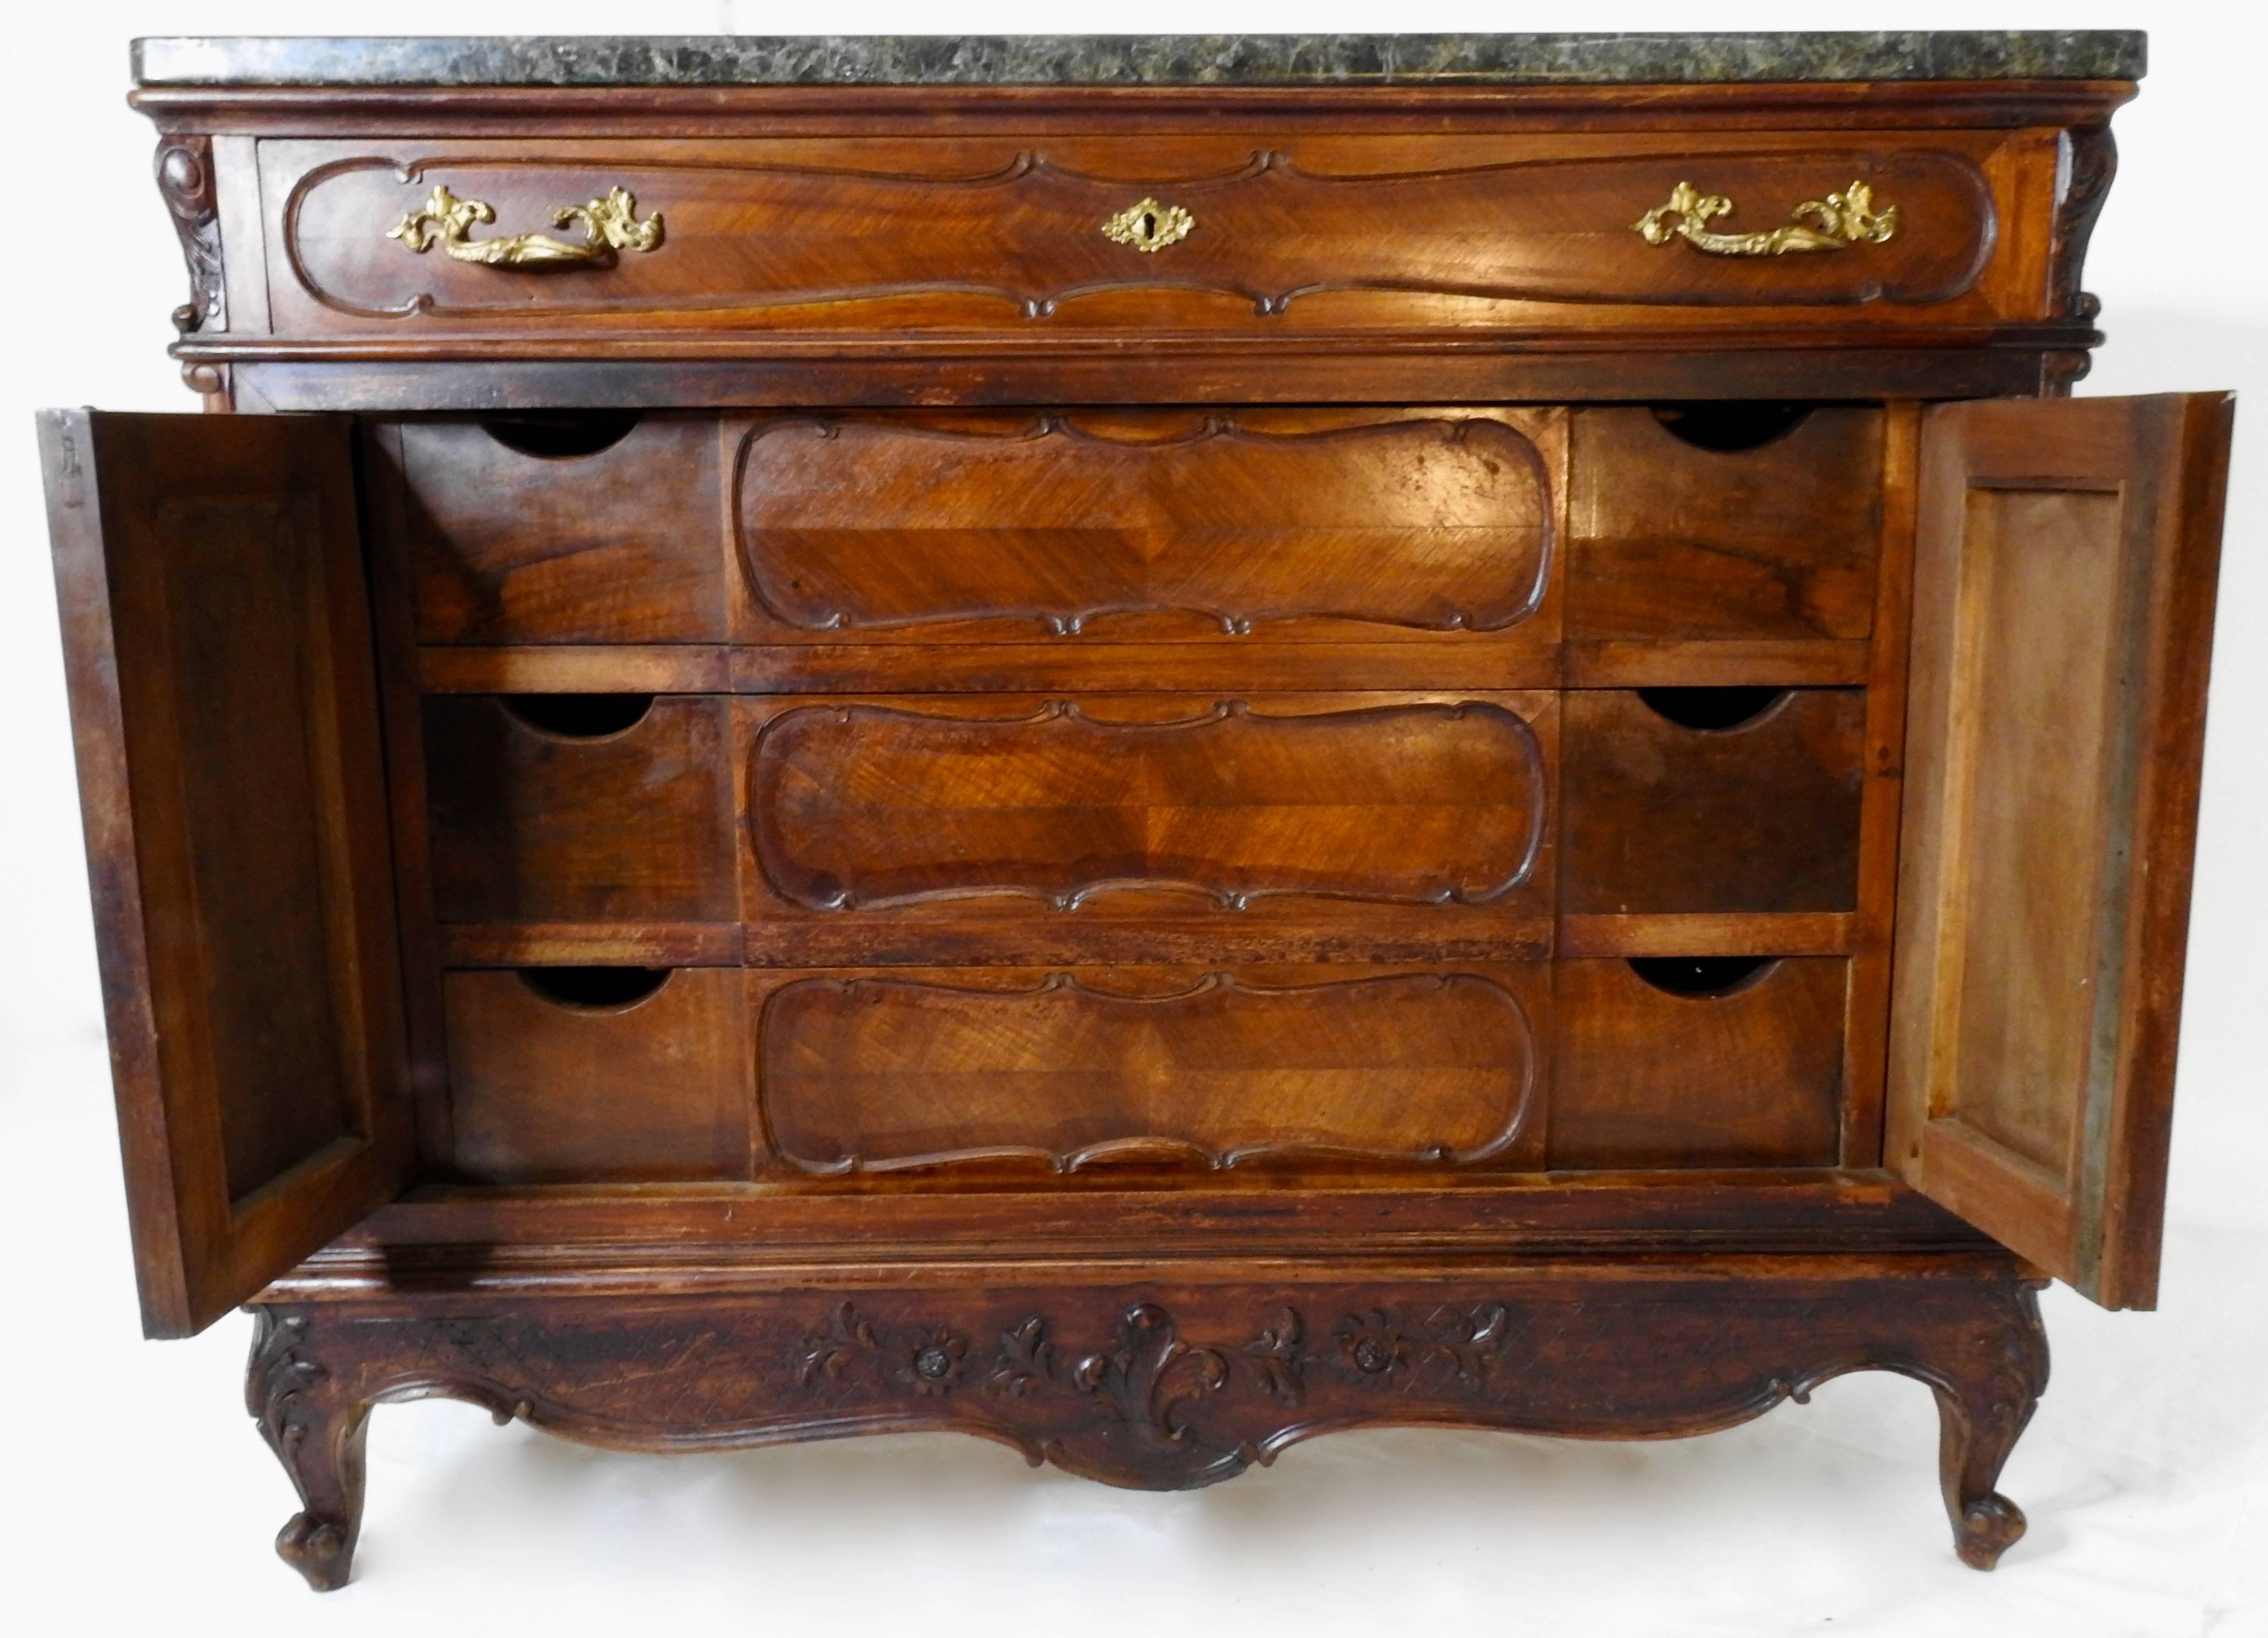 A scalloped apron graces the front of this French linen press featuring a black granite top. One drawer on the top level with the side doors opening to reveal many drawers with dove tails. Feet are of the escargot style.